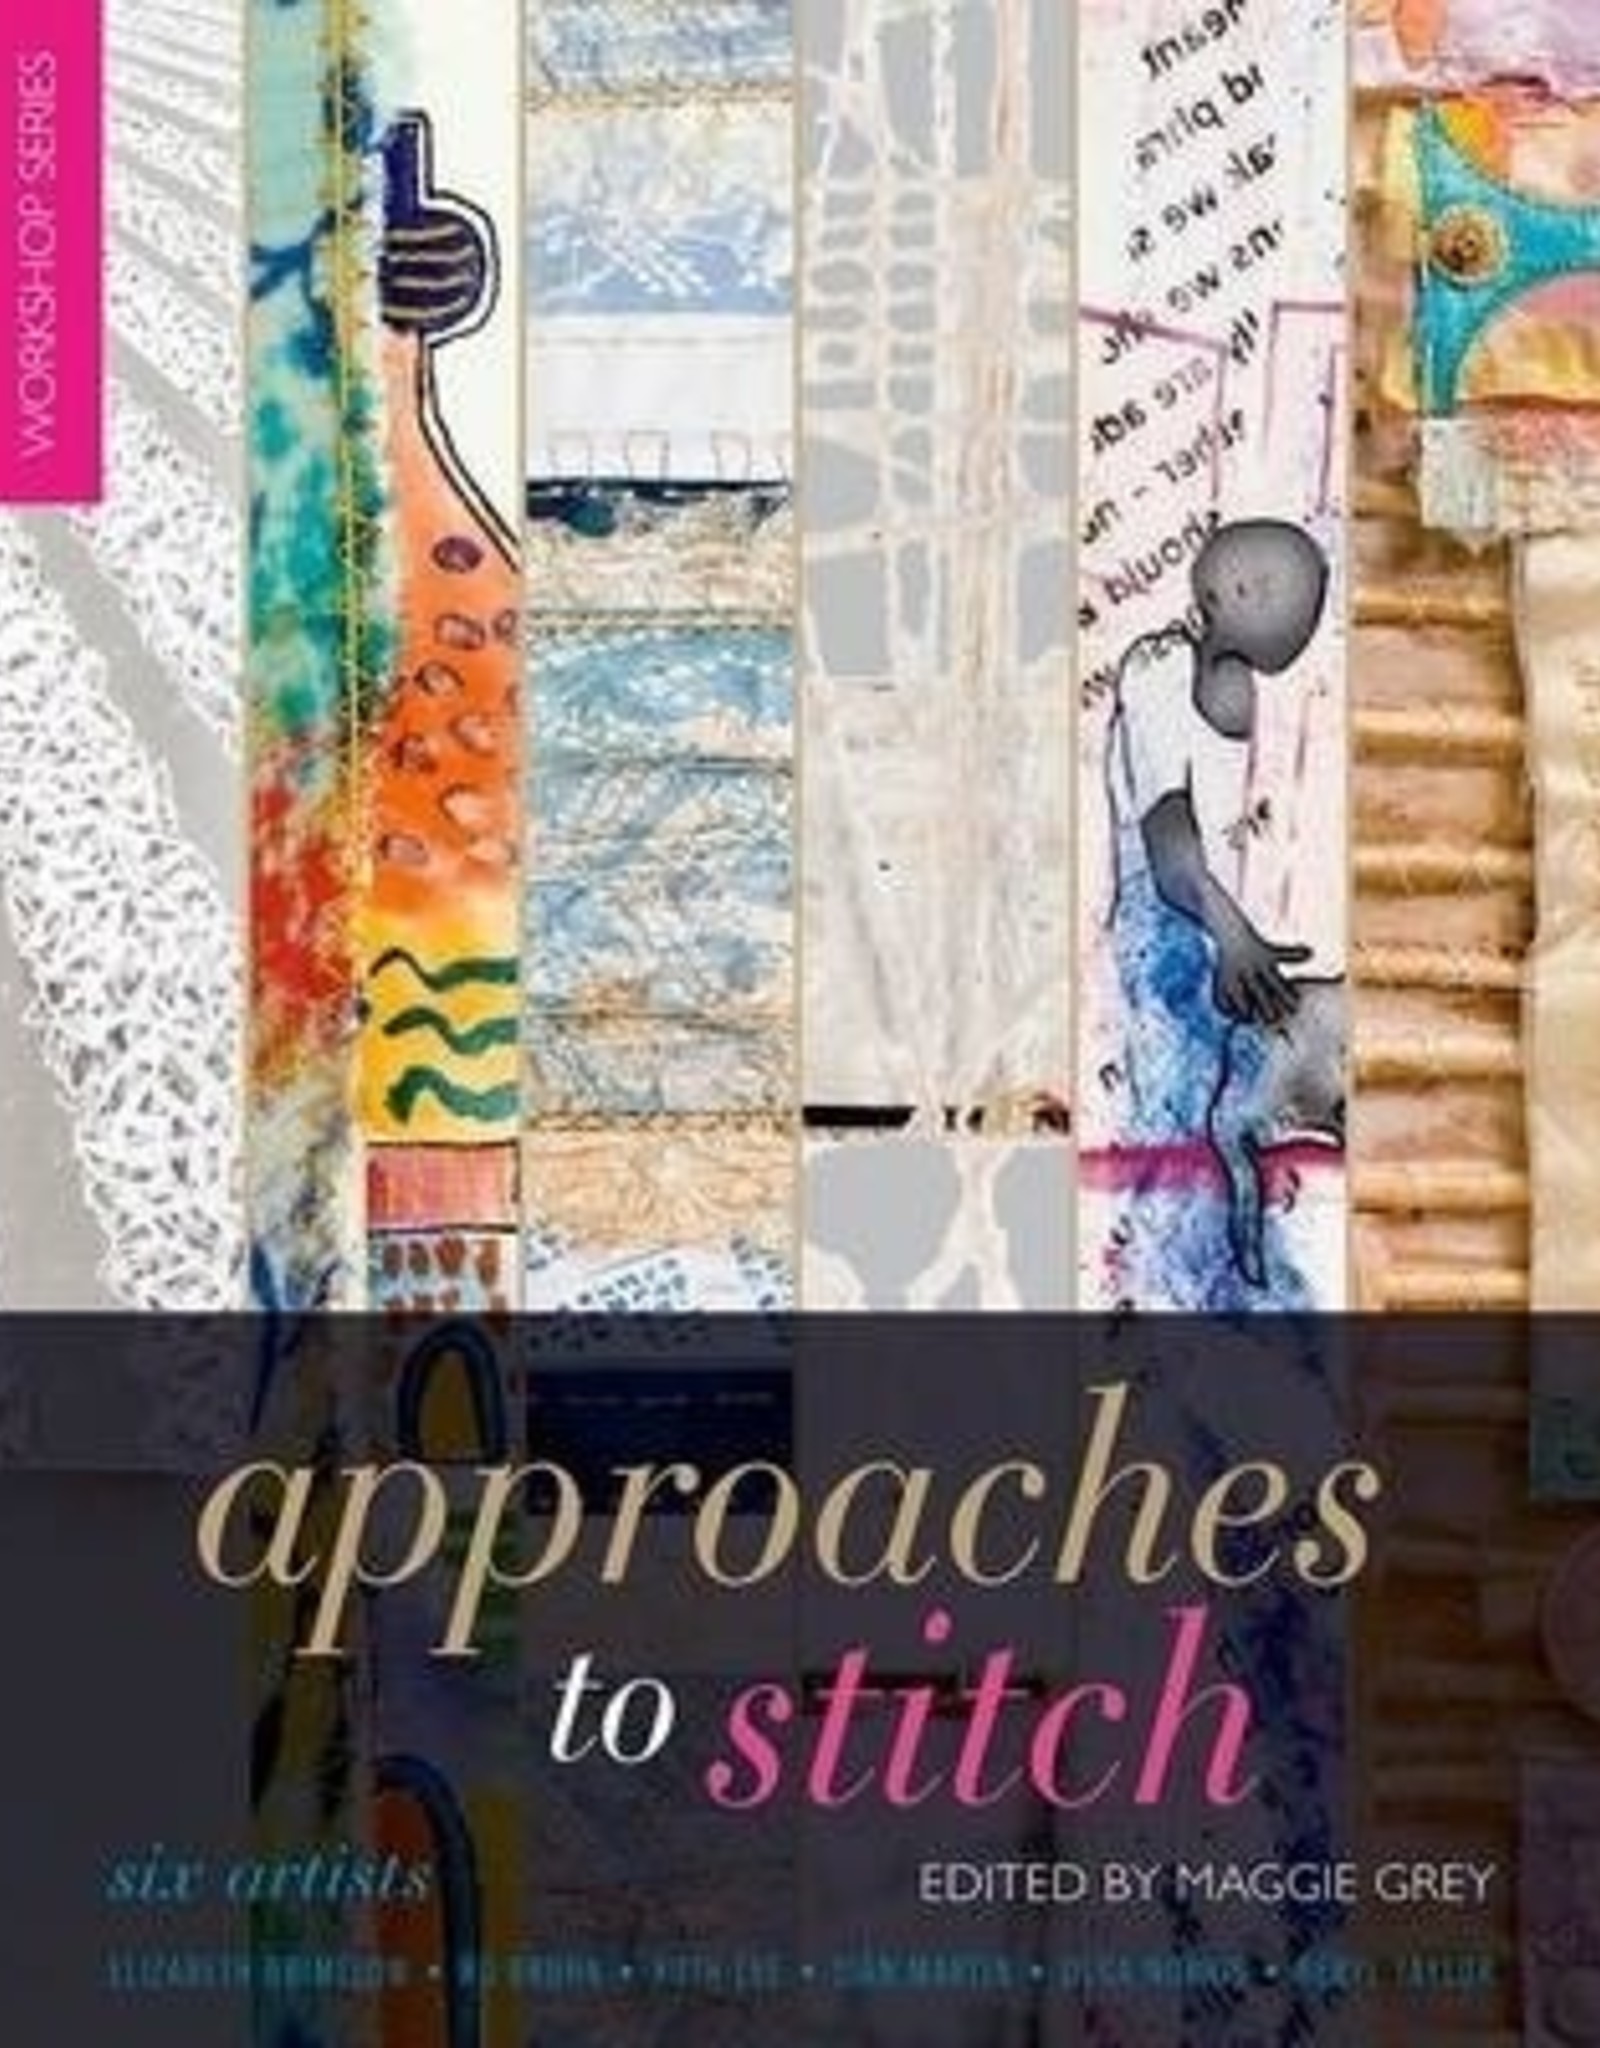 Approaches to Stitch